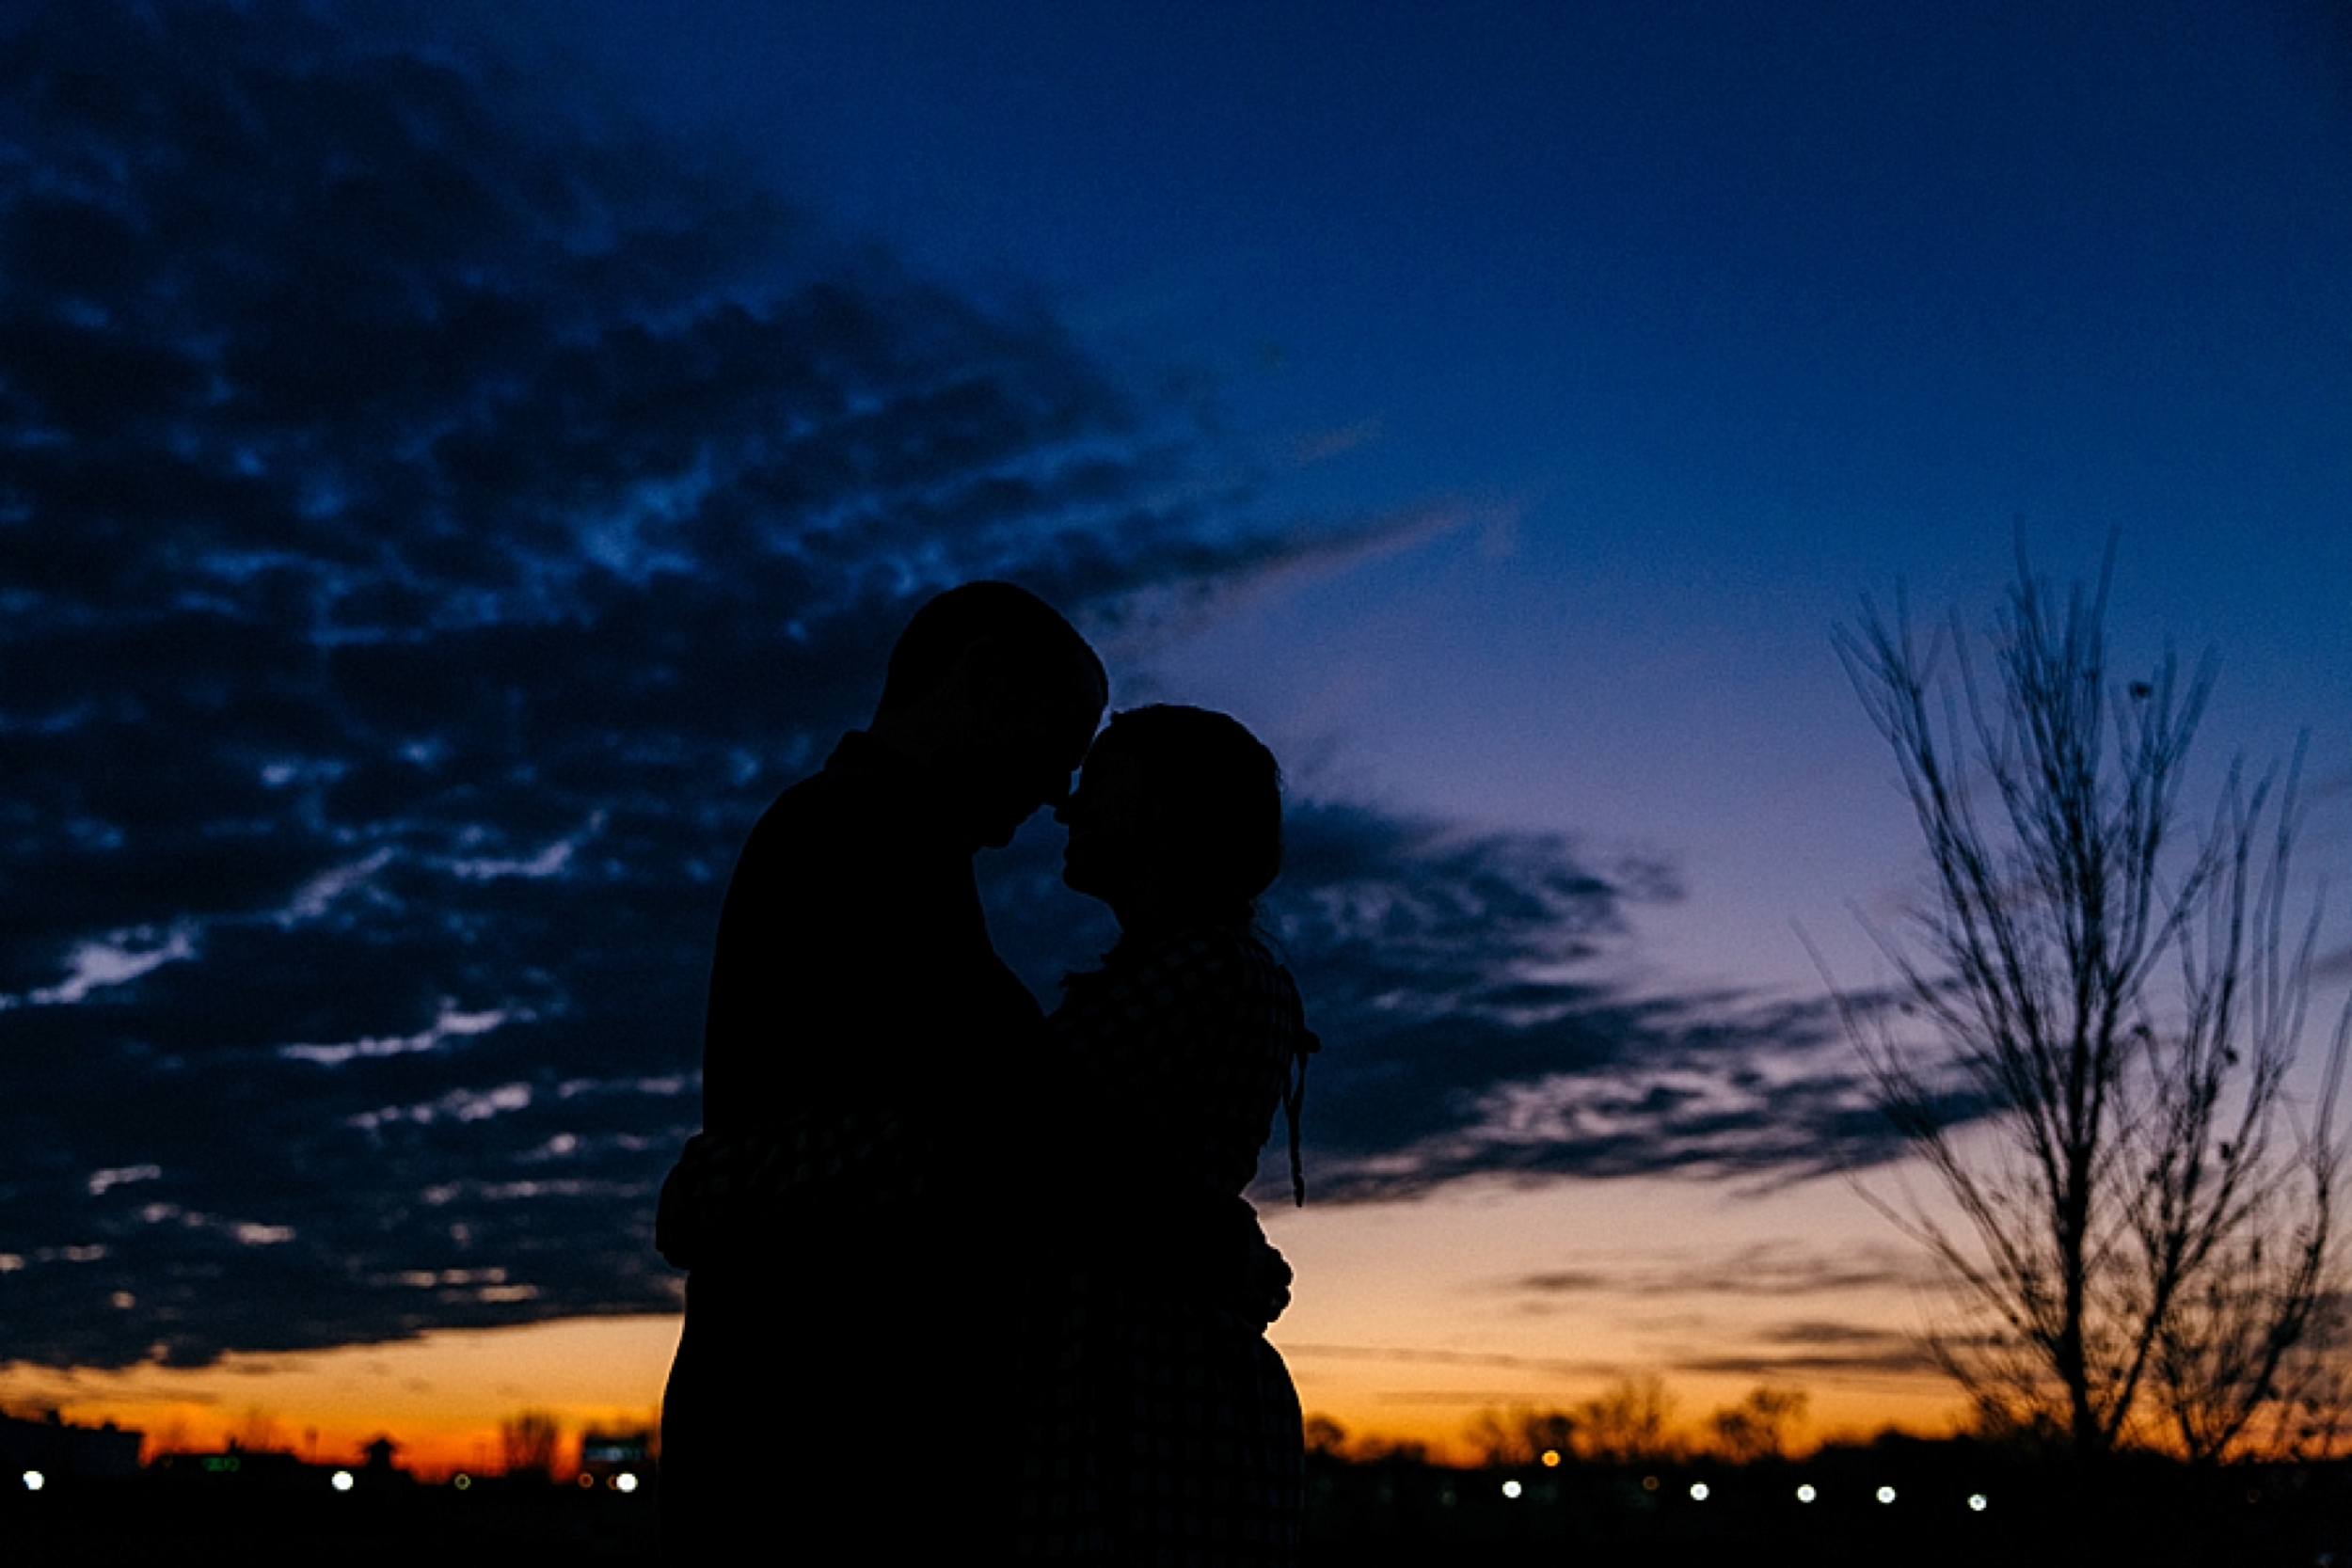 midwest-michigan-indiana-engagement-and-wedding-photographer-session-in-columbus-ohio_0014.jpg